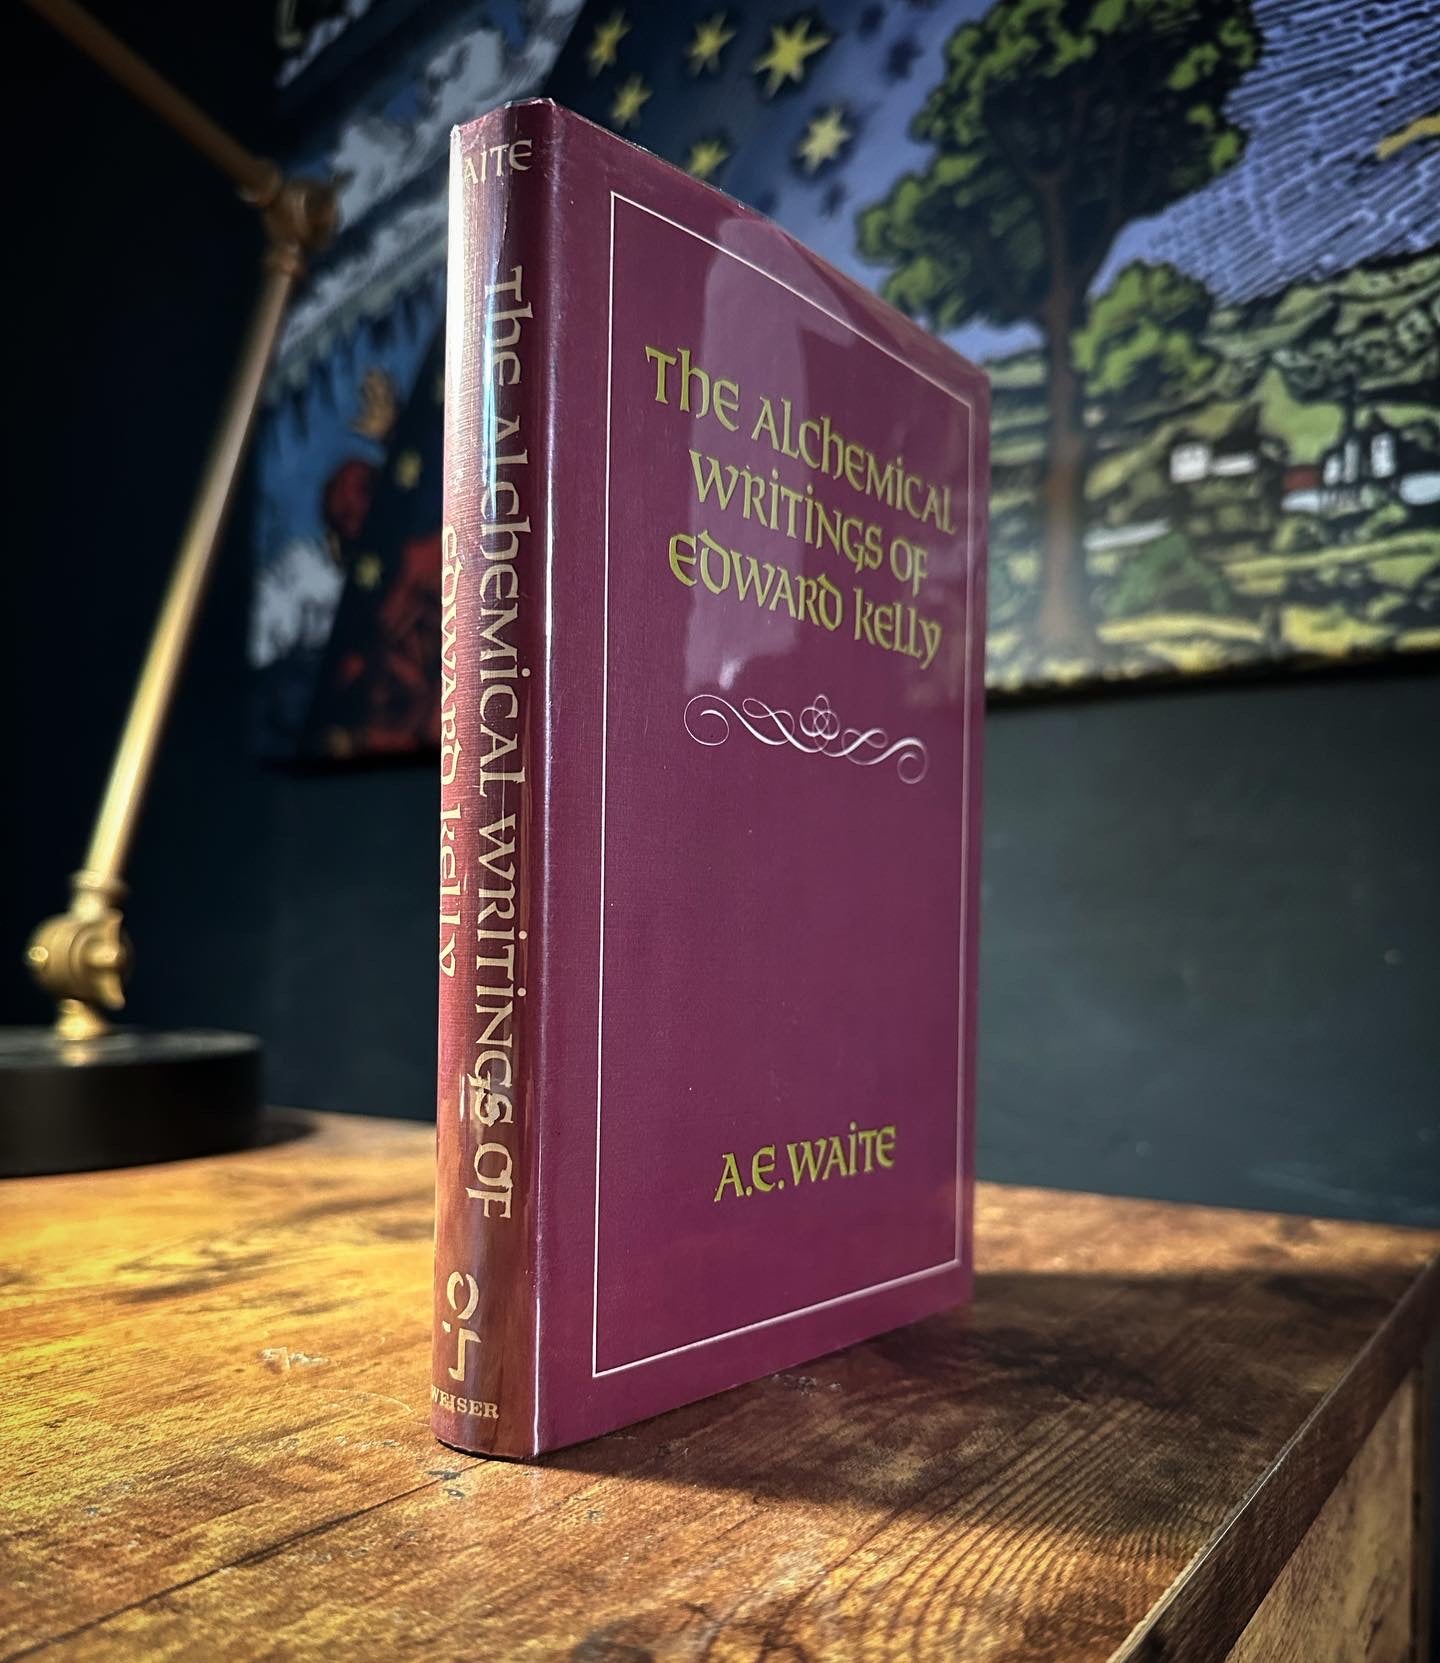 The Alchemical Writings of Edward Kelly by A.E. Waite